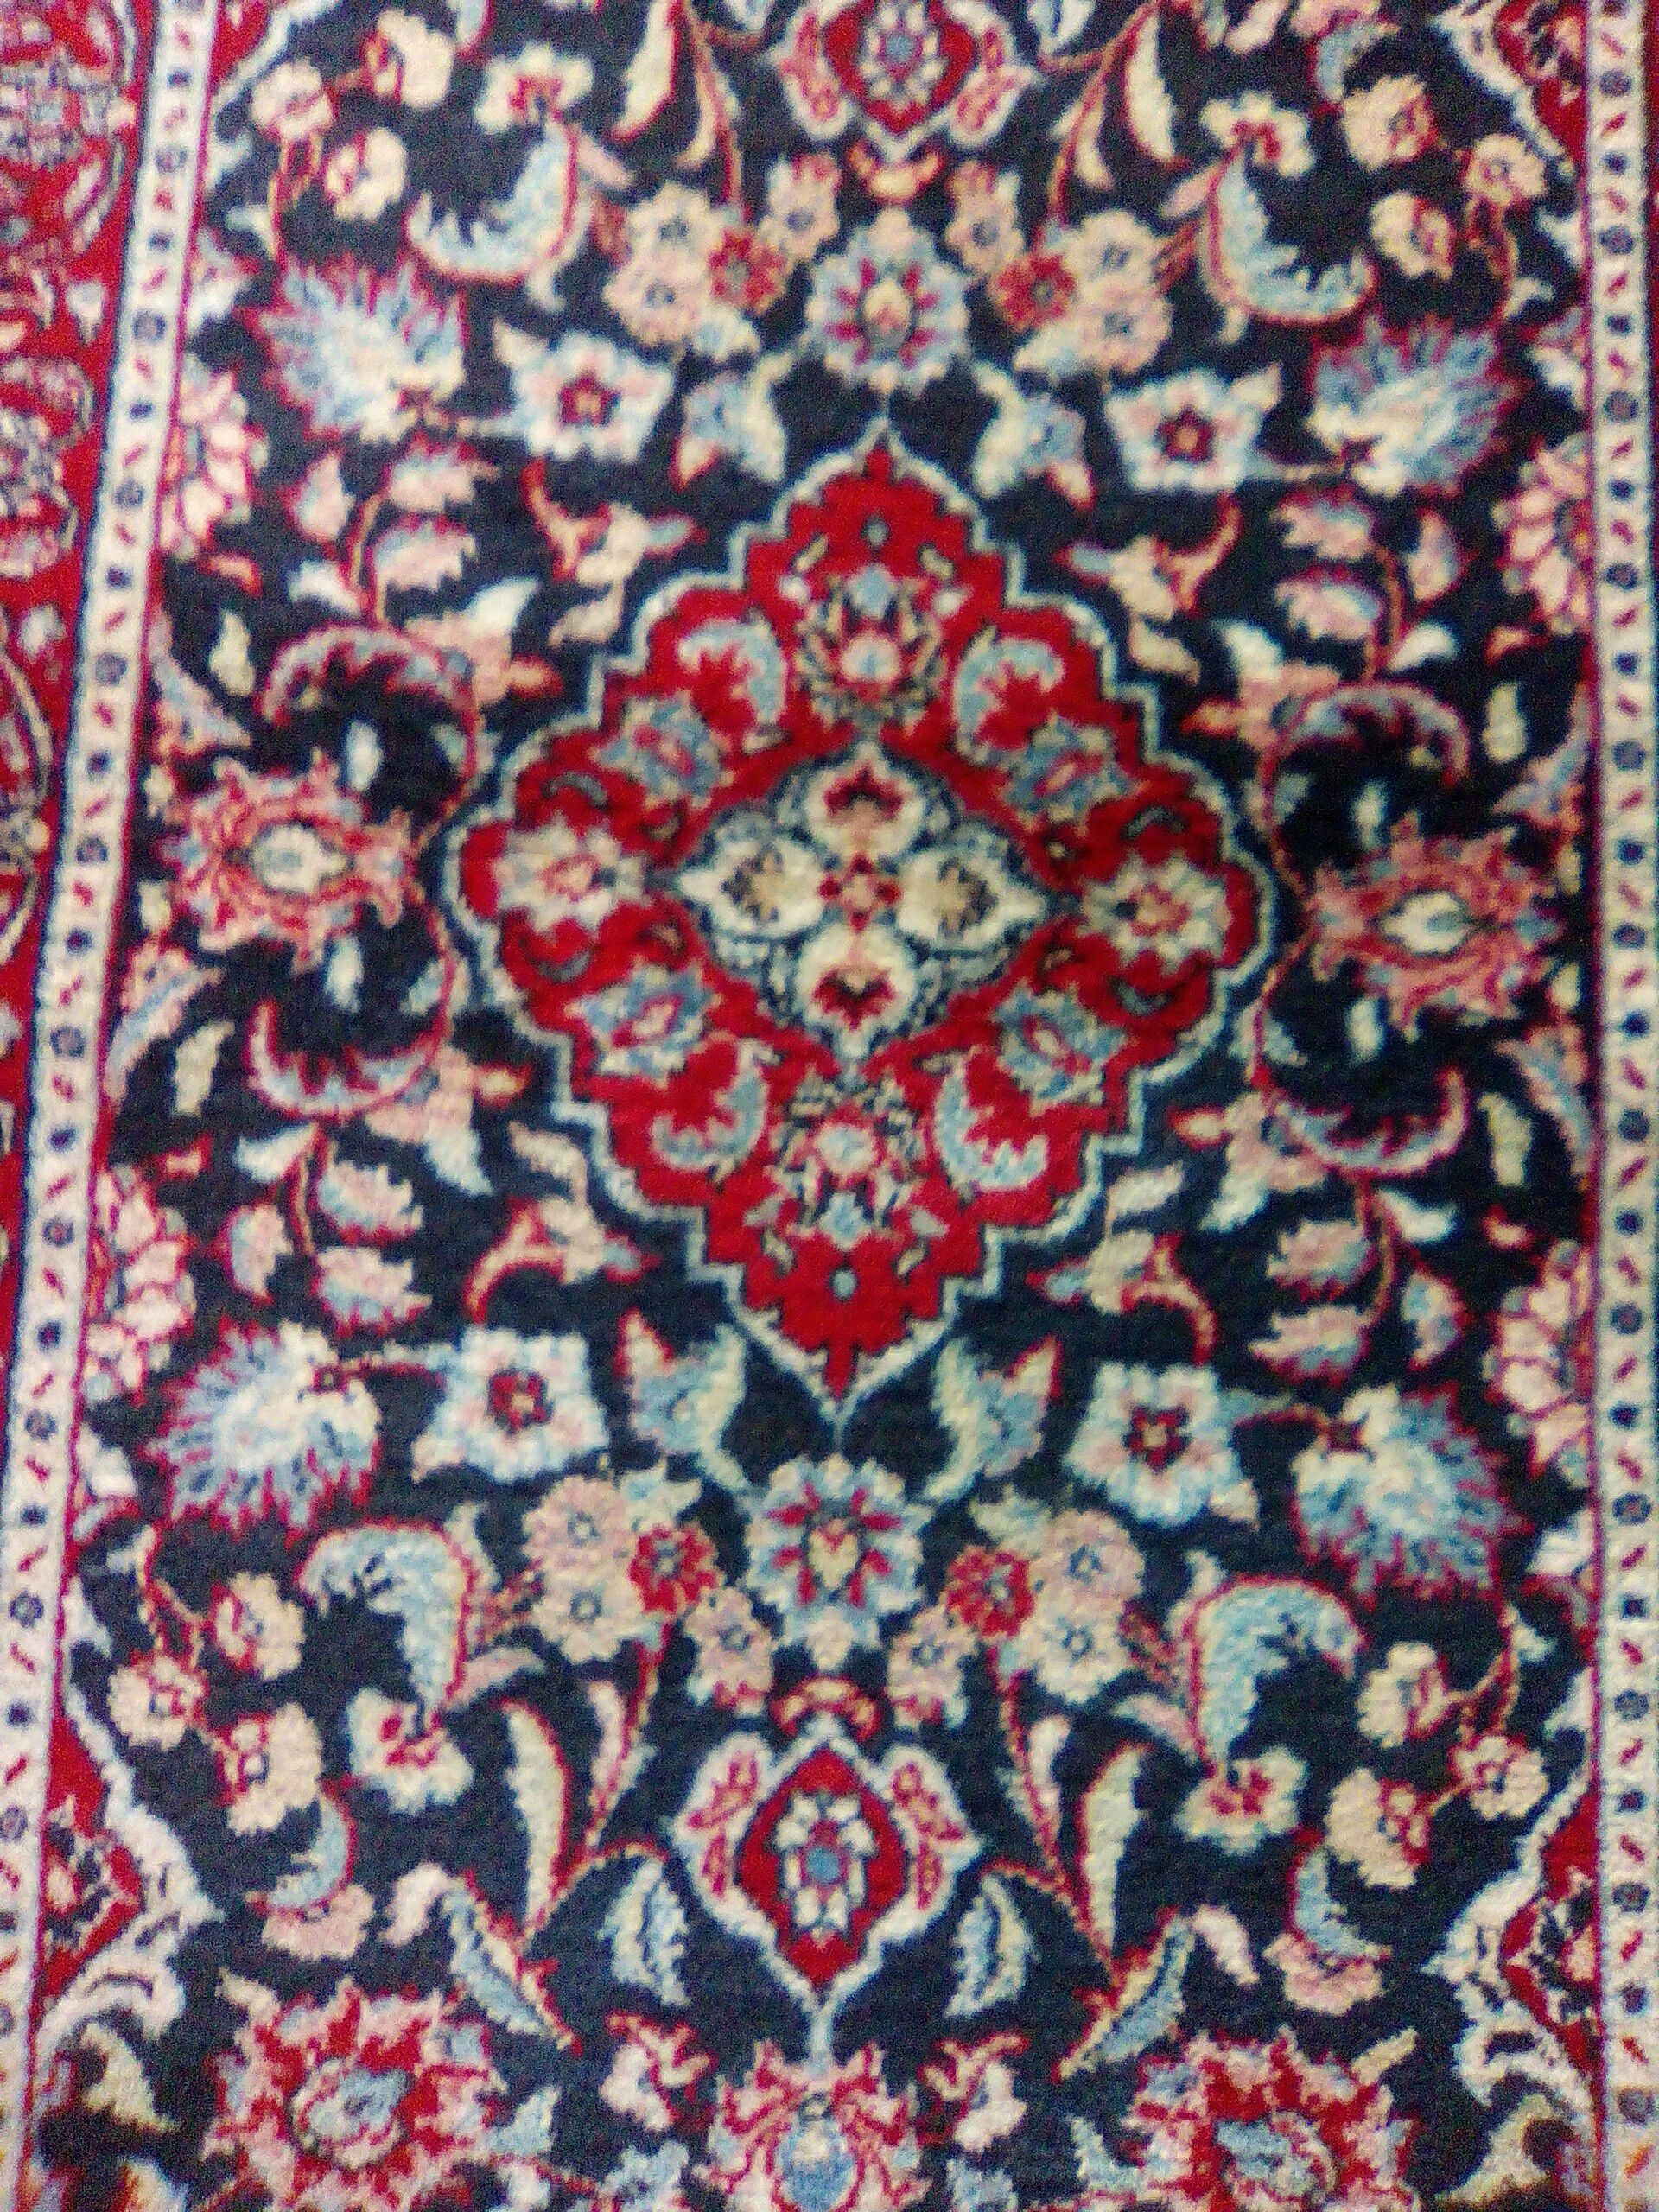 Hand woven Persian designed 5x3 blue and white and red colors.